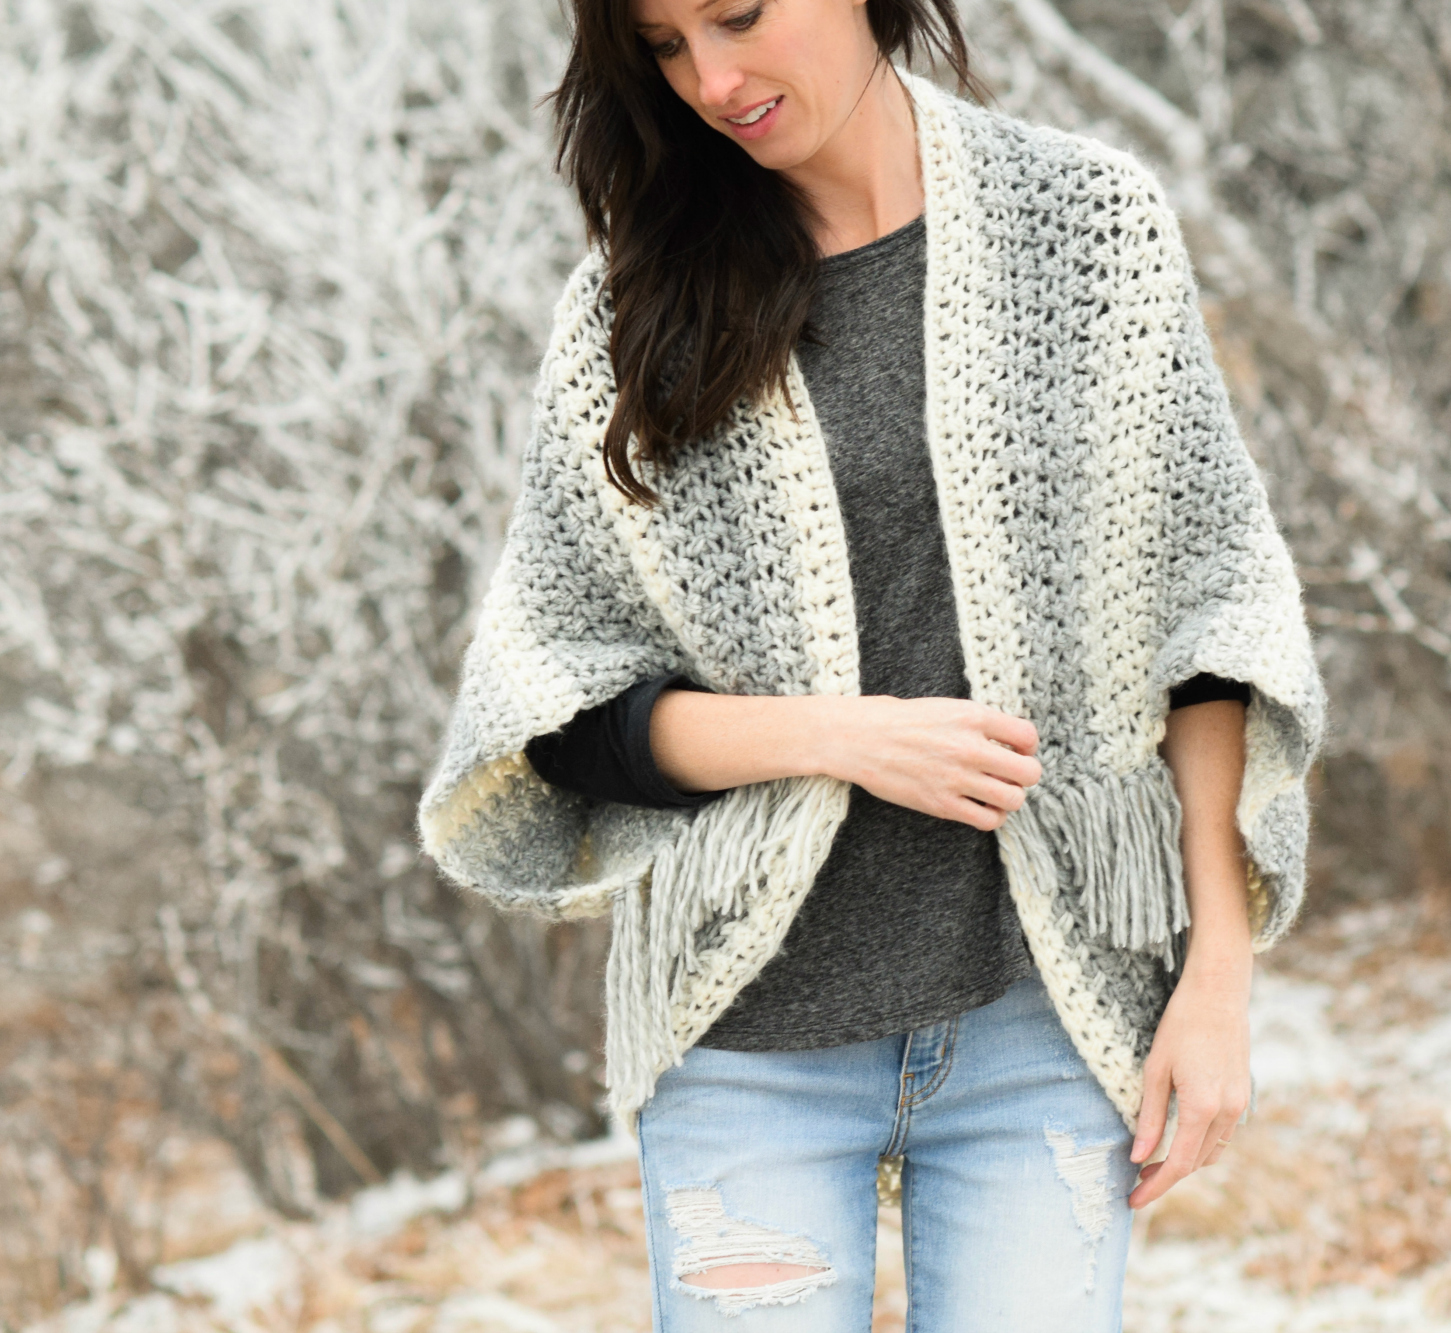 Crochet CARDIGAN SHRUG perfect for Winter so cosy and warm, easy